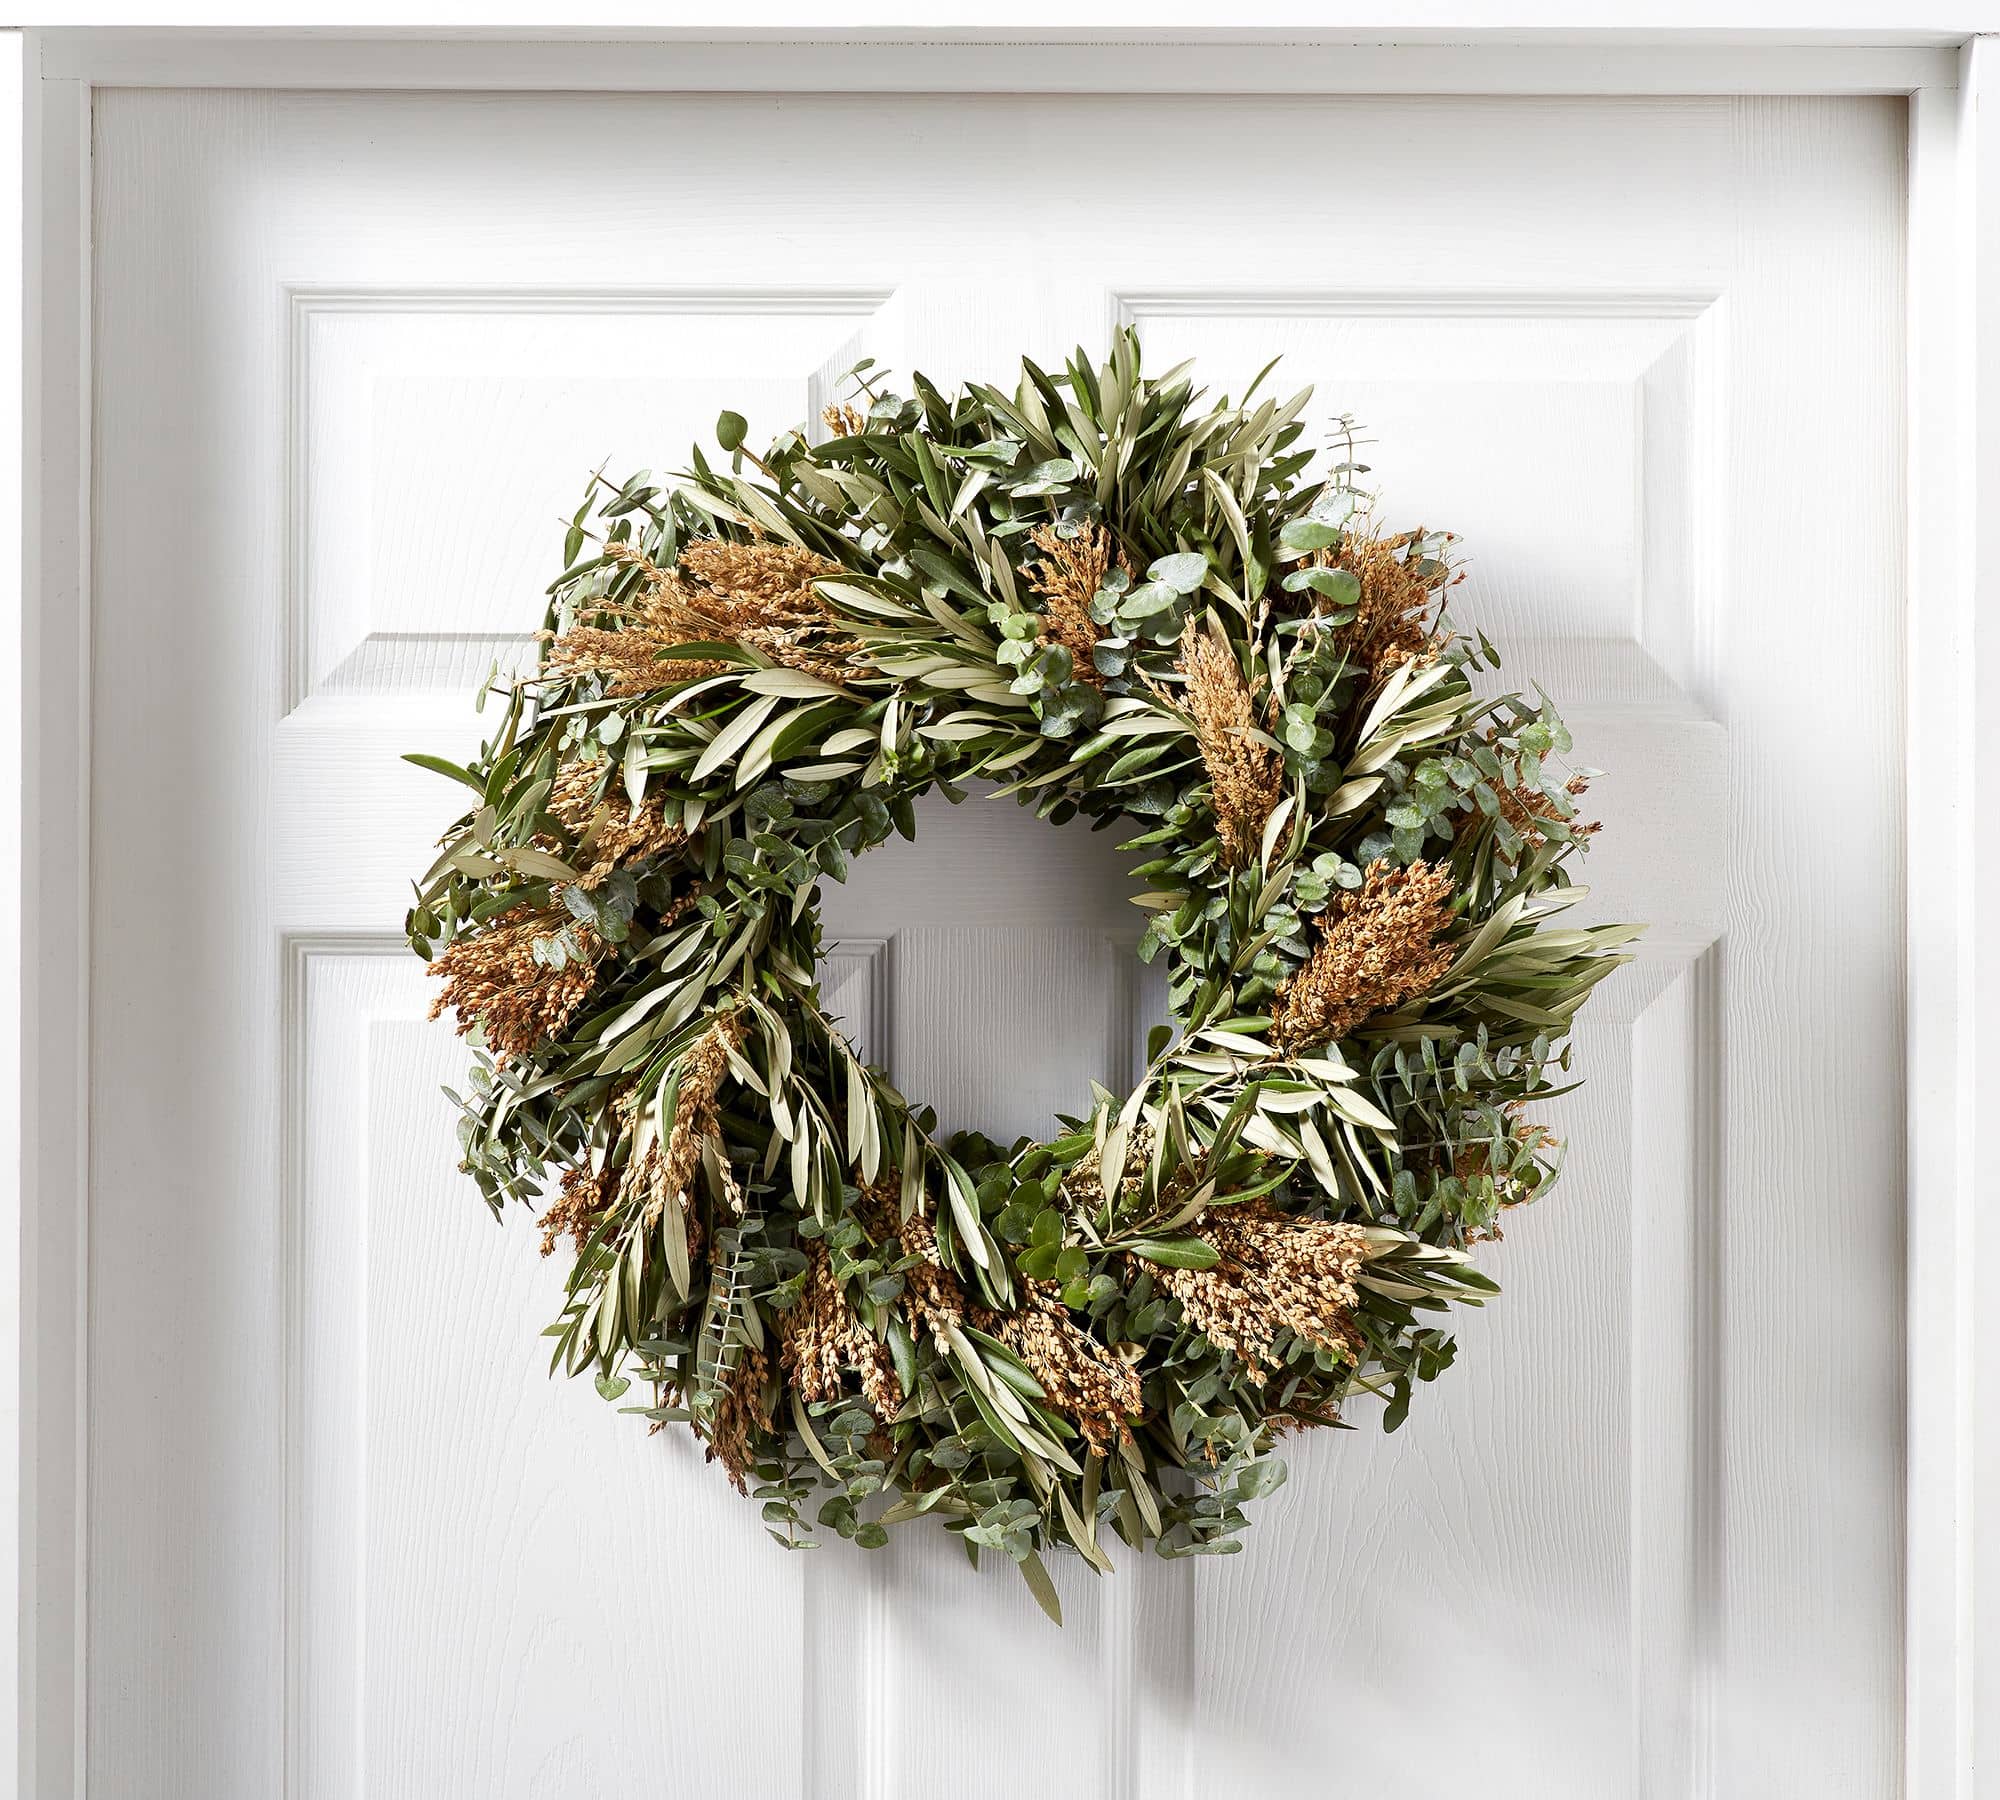 Wreath made of greenery with a bell against a white front door